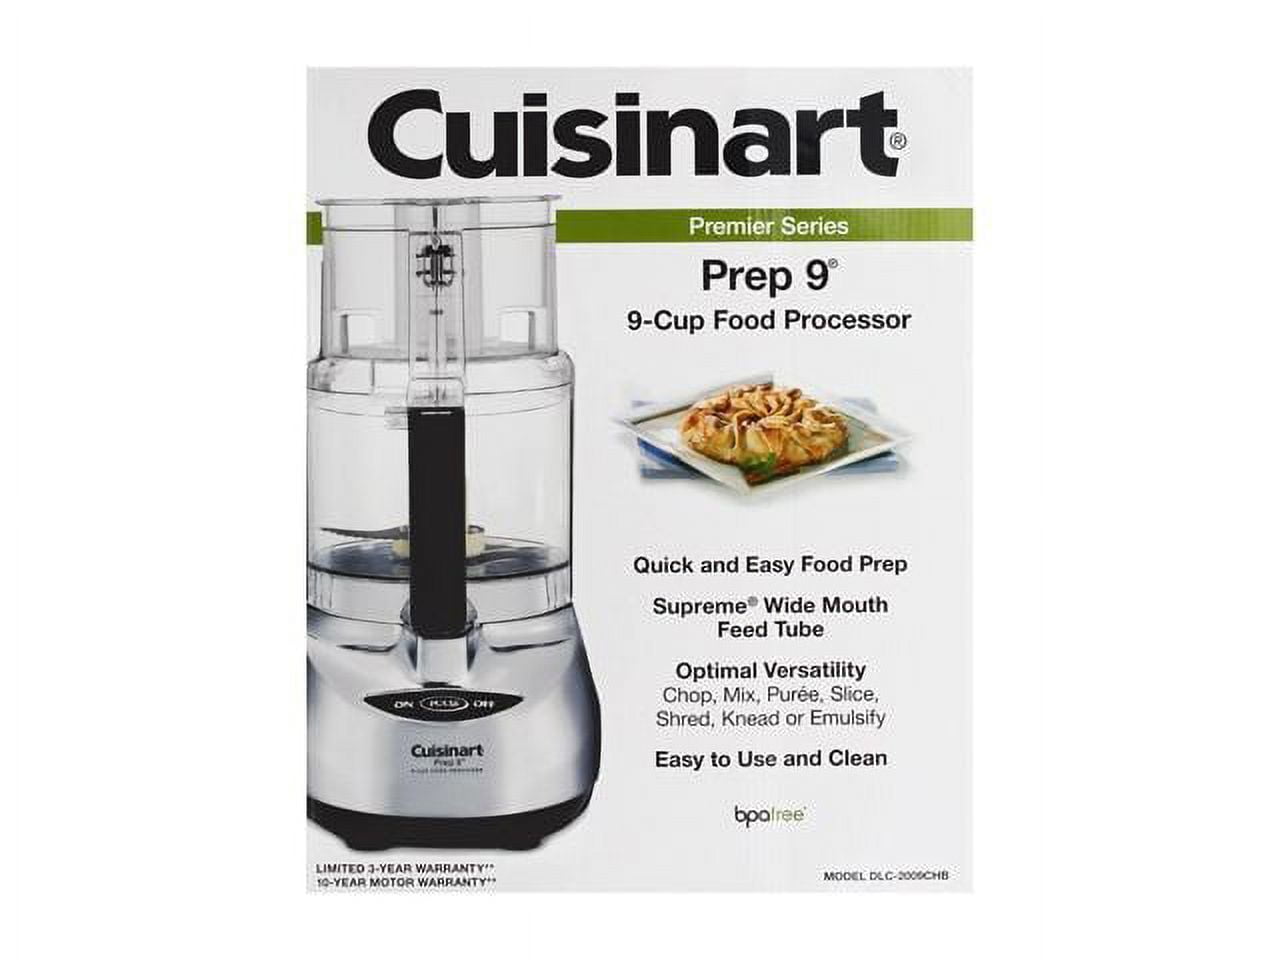 Cuisinart Prep 9 Food Processor How To Use